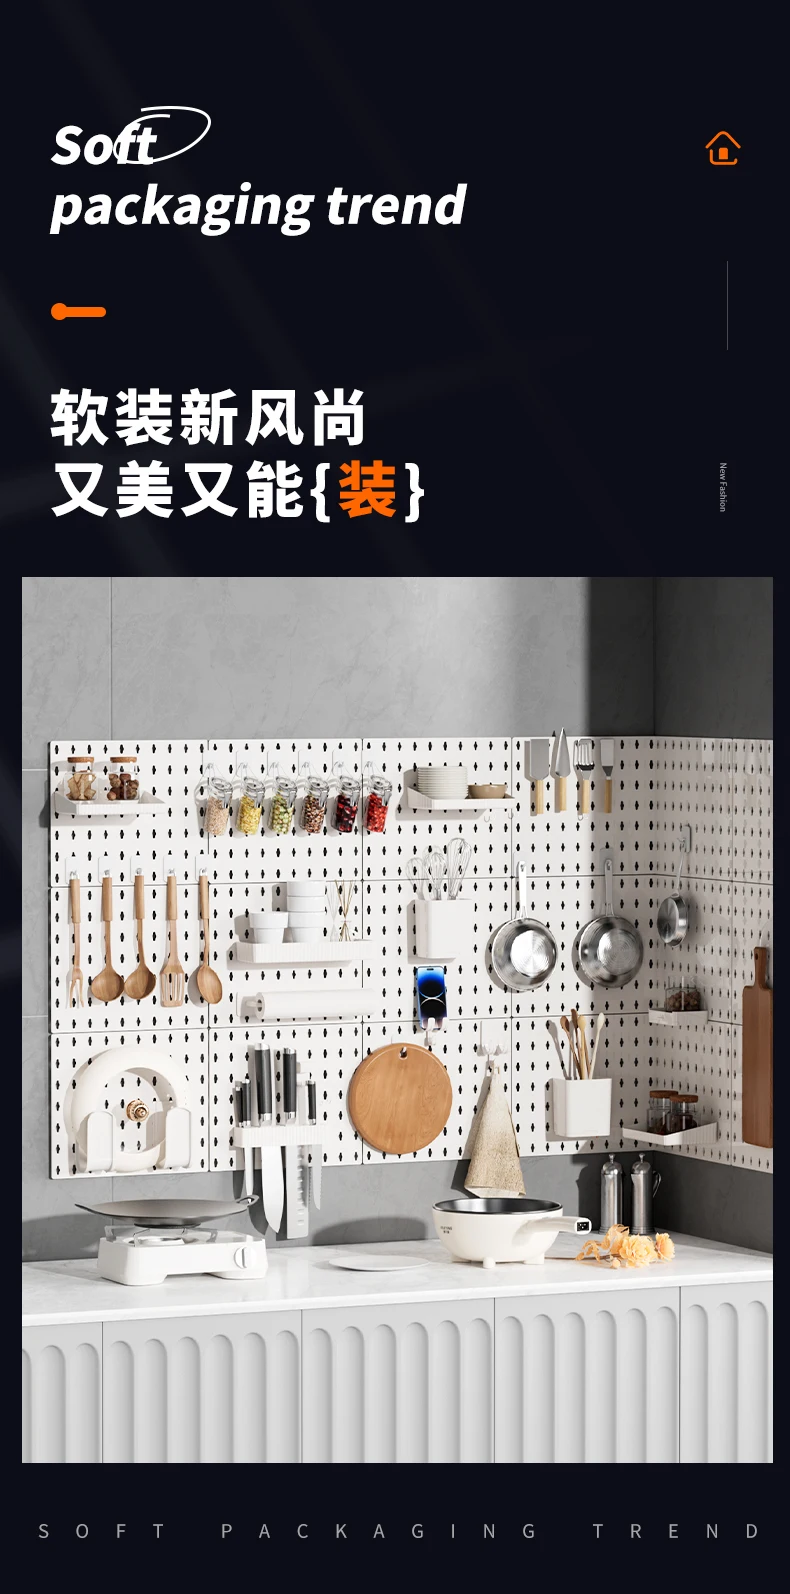 No punching kitchen accessories Assortment Hanging Hole Pegboard Wall Organizer Kitchen Storage Shelves Display rack